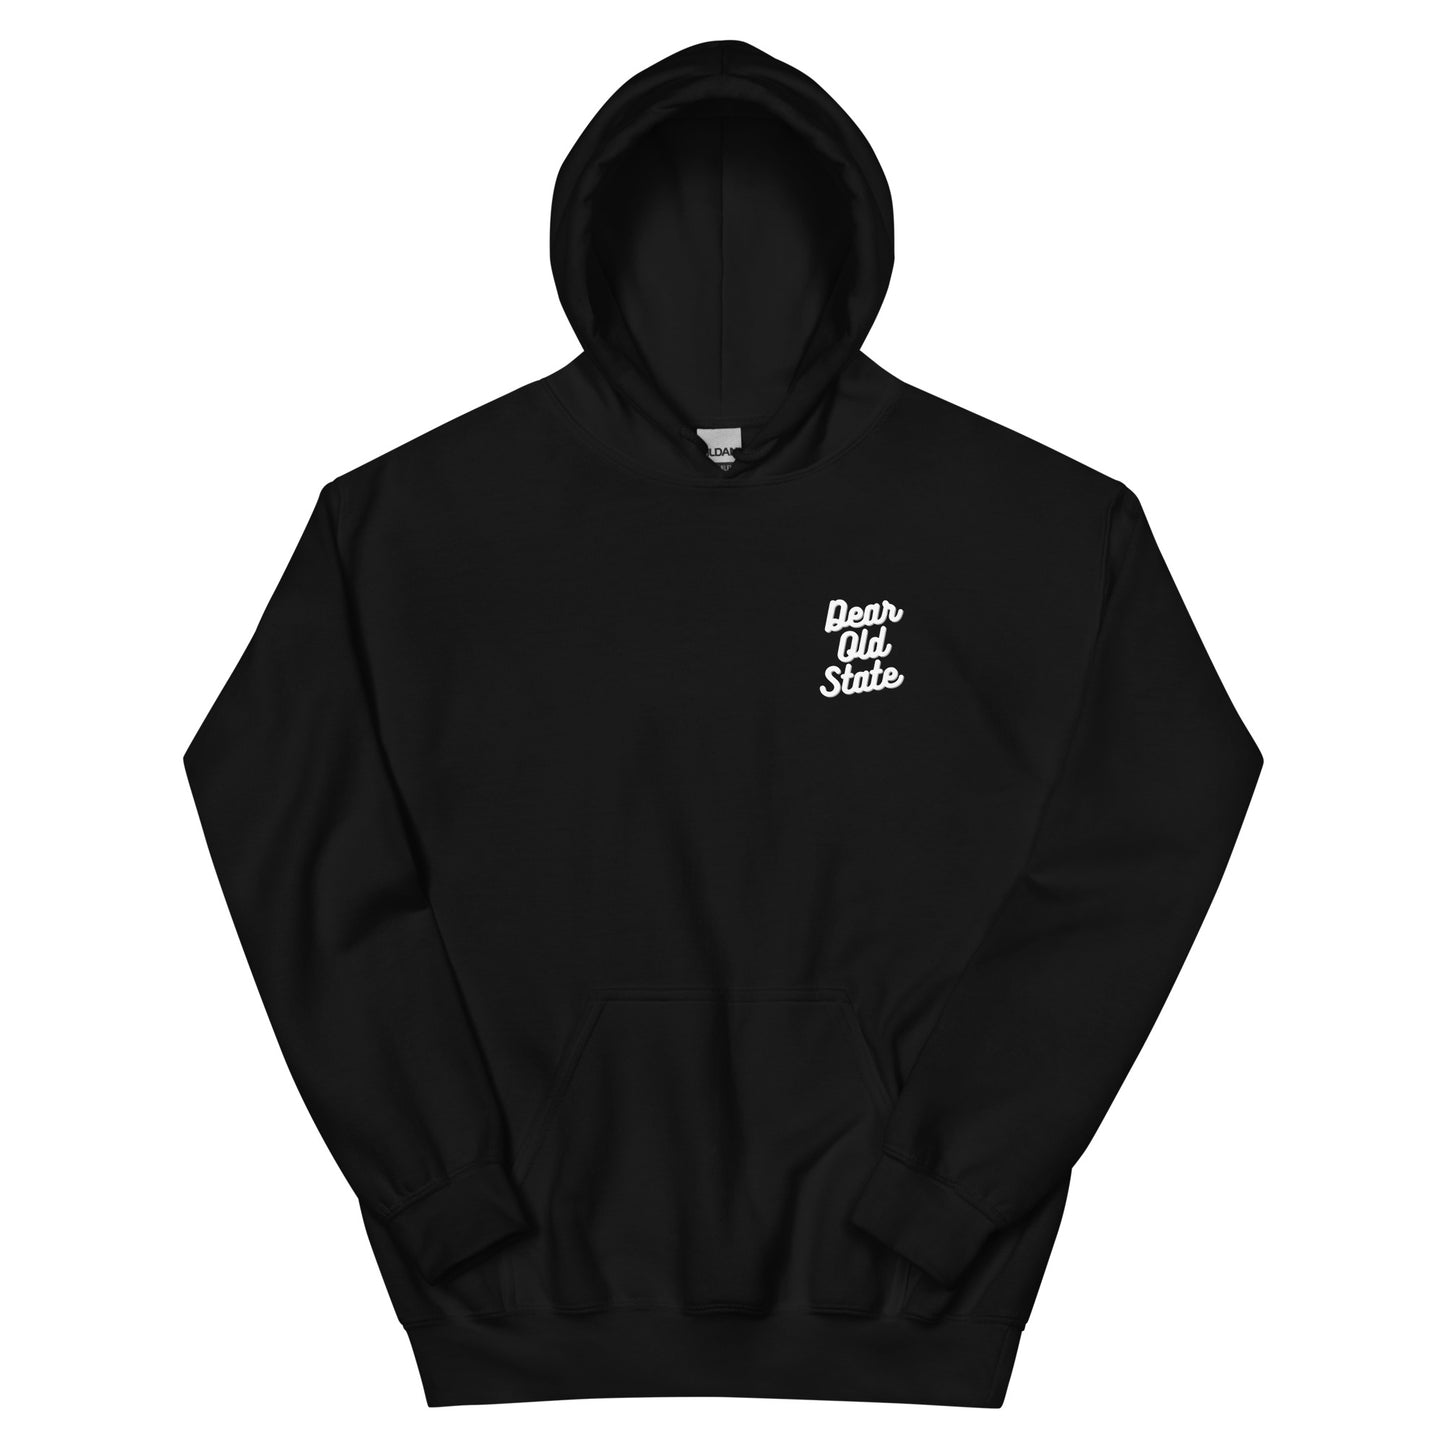 "Dont Bet Against Us" Hoodie